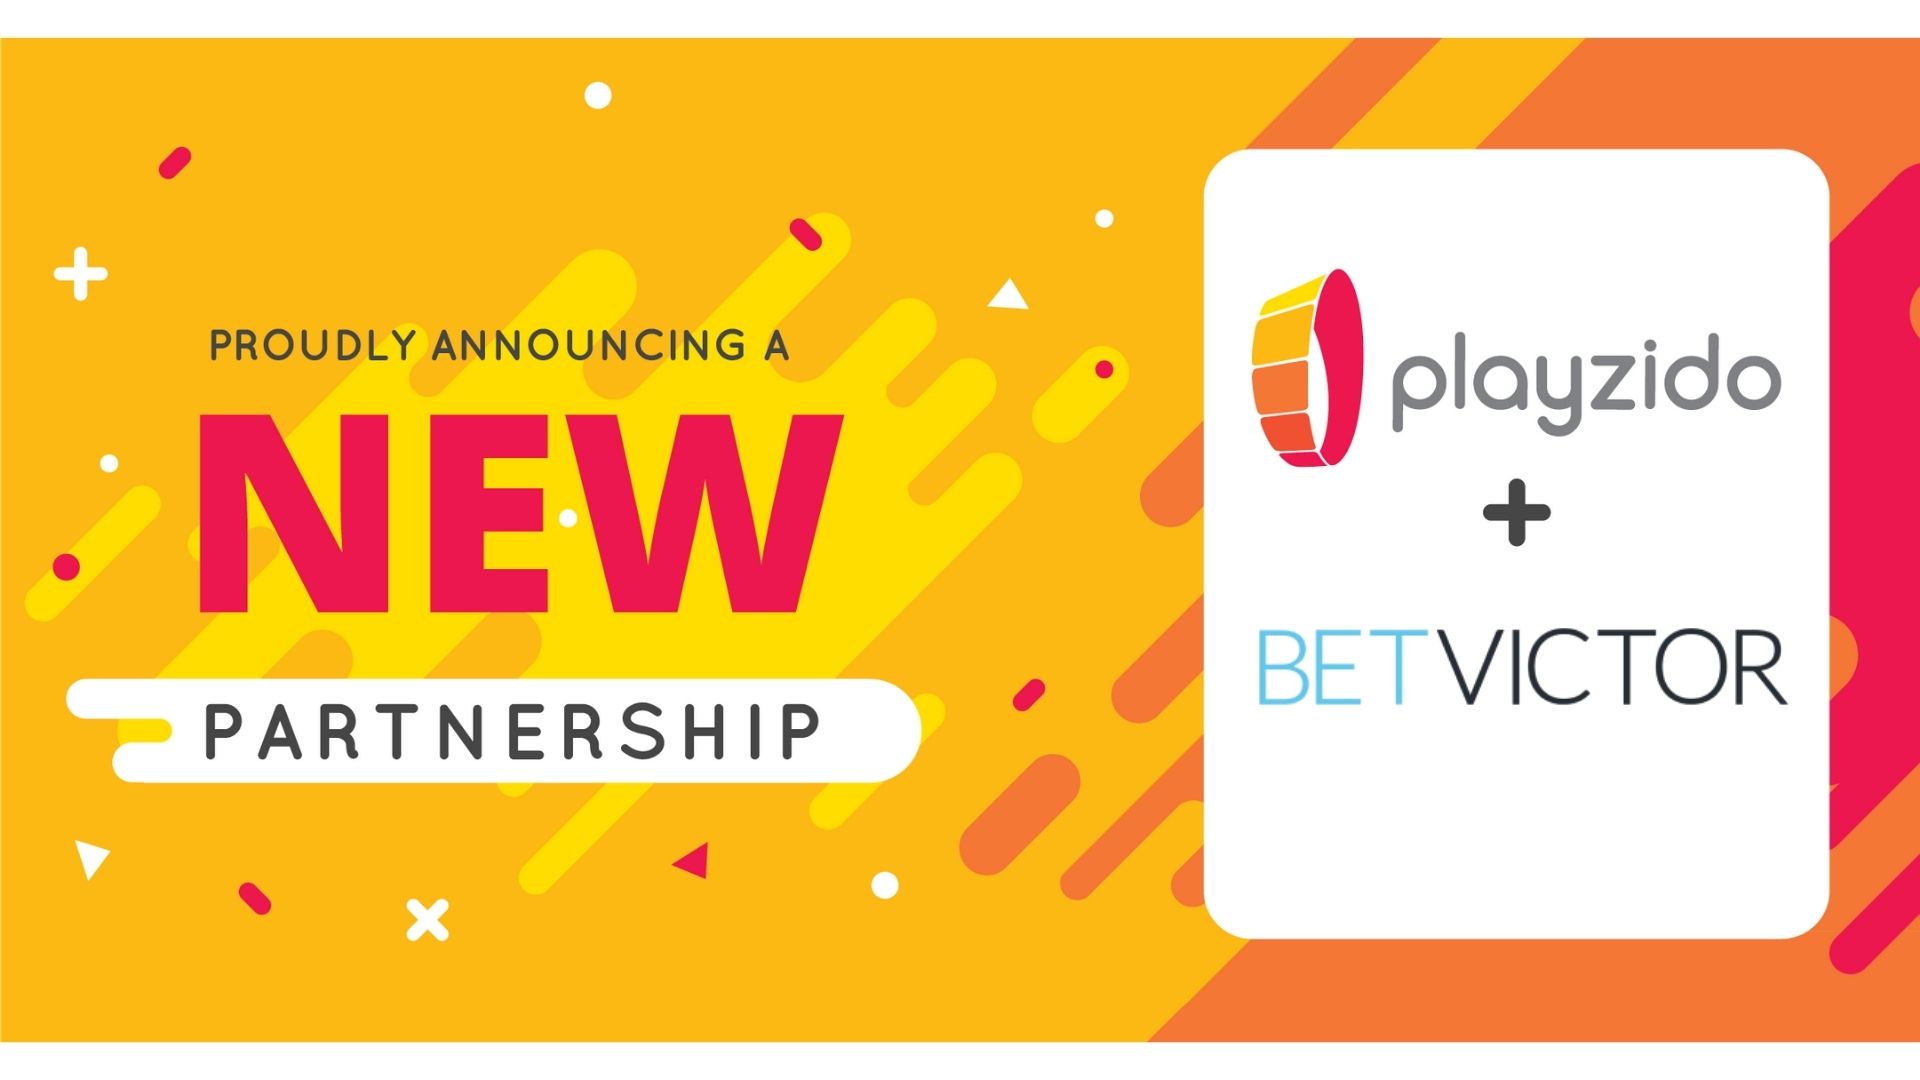 Playzido Continues its Rapid Growth  Trajectory with BetVictor Partnership.